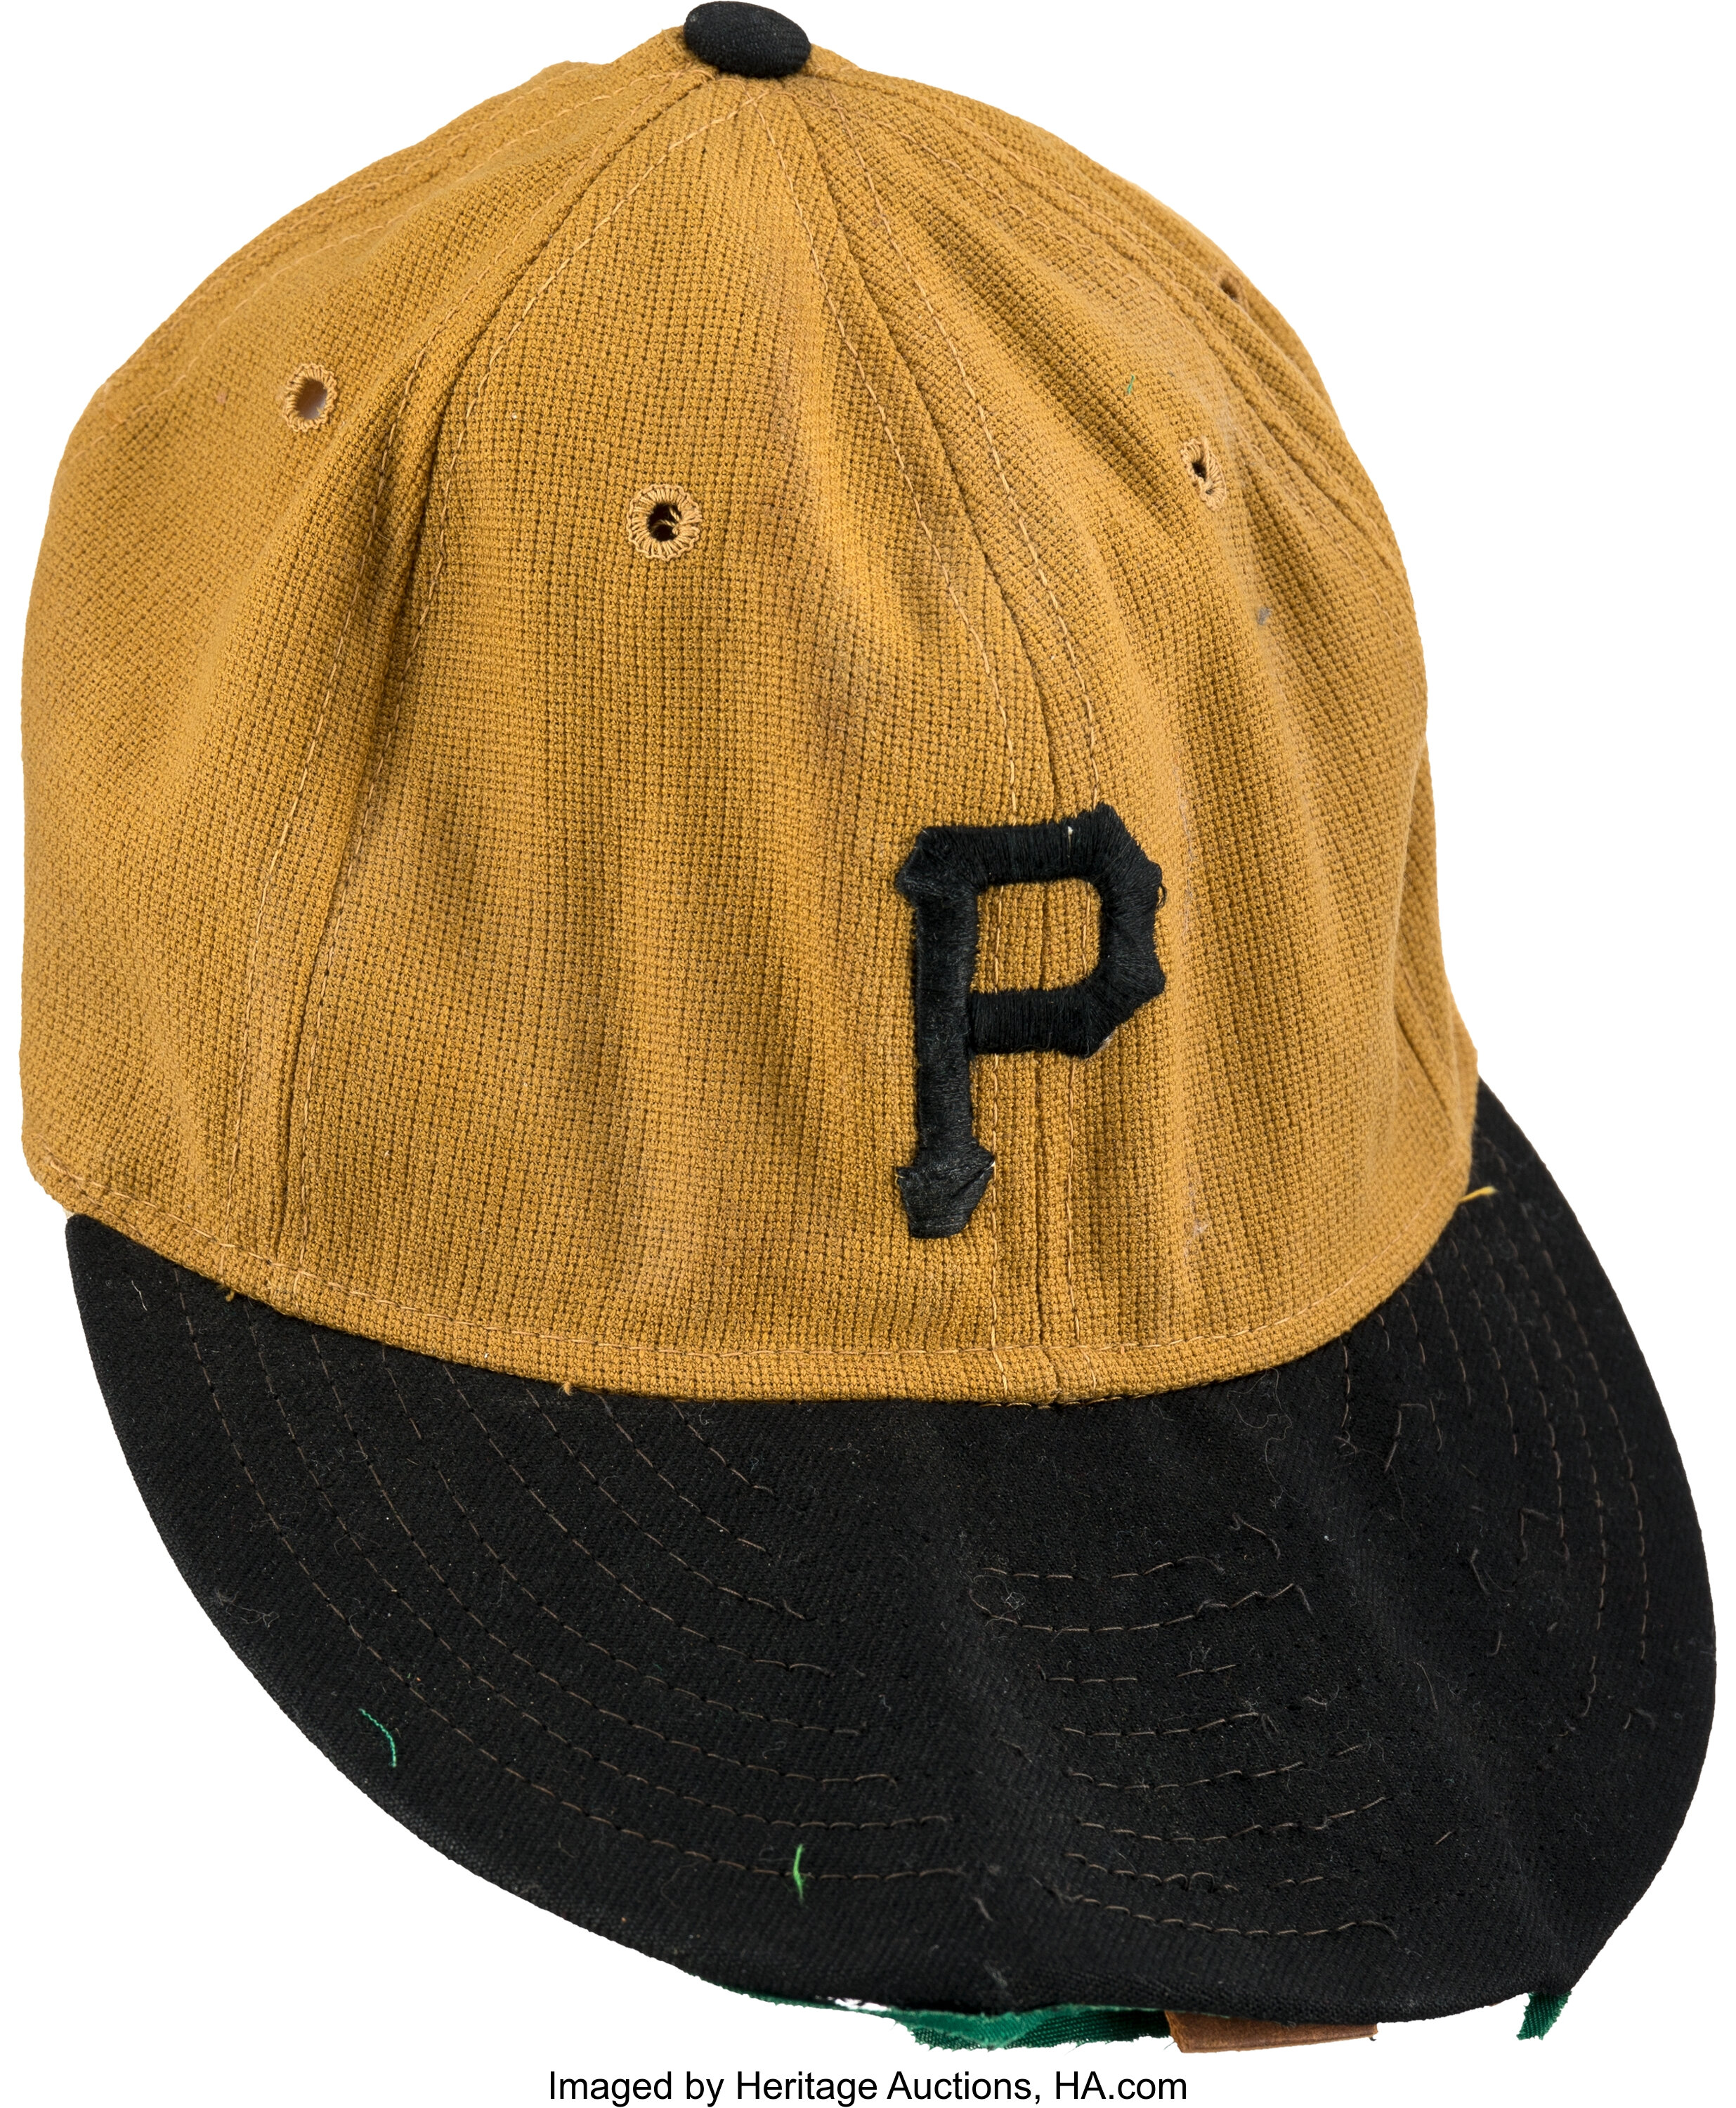 Pittsburgh Pirates 1971 World Series Championship Patch – The